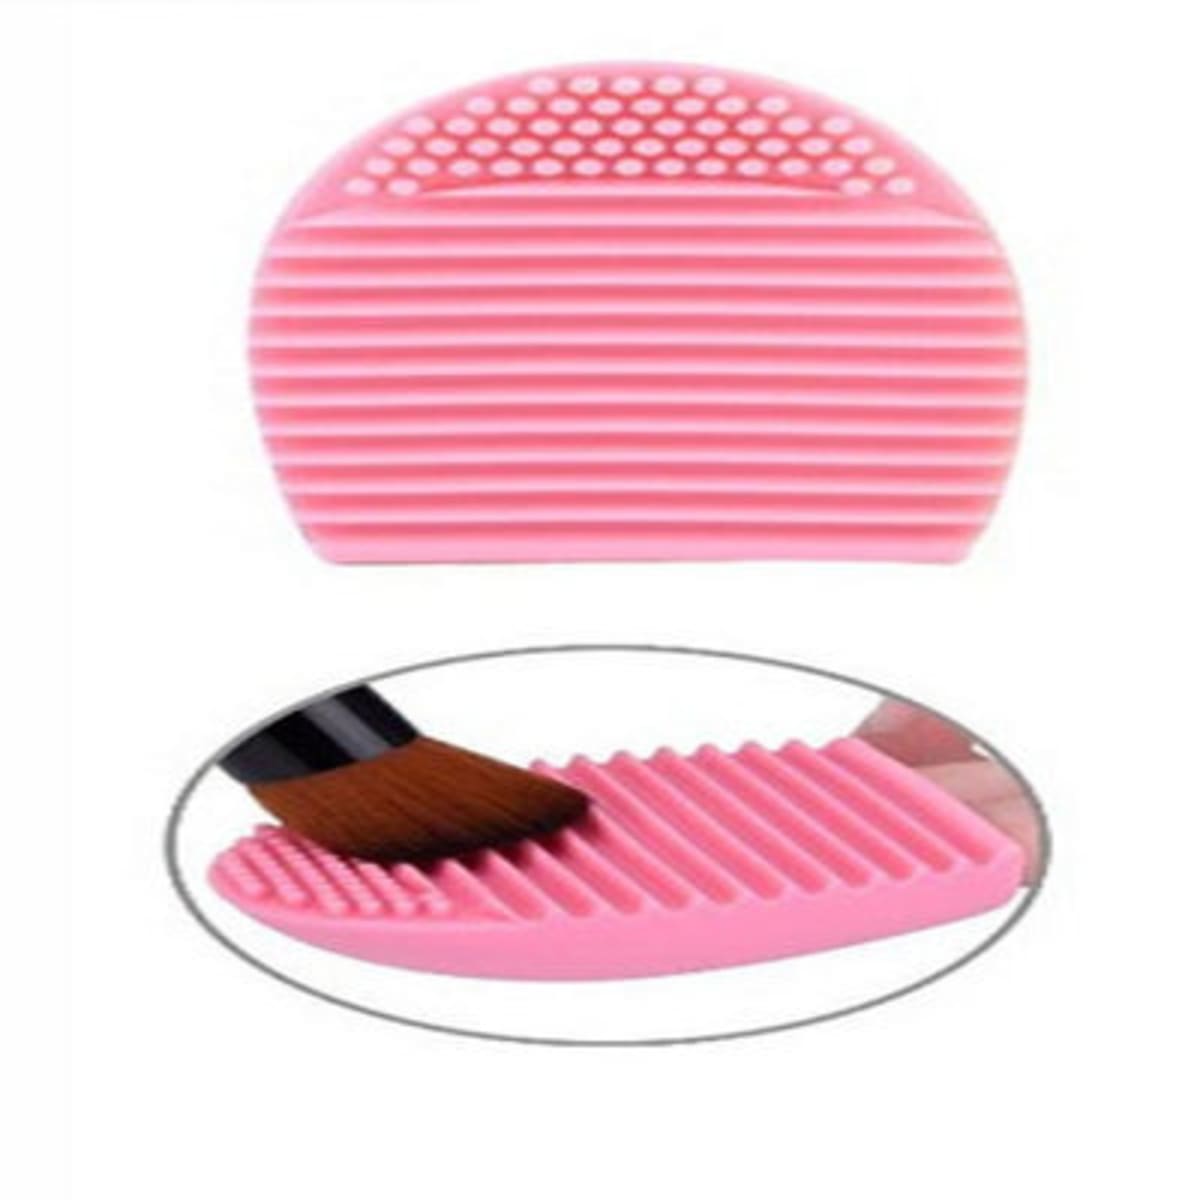 BT SILICONE MAKEUP BRUSH CLEANER EGG - HOT PINK